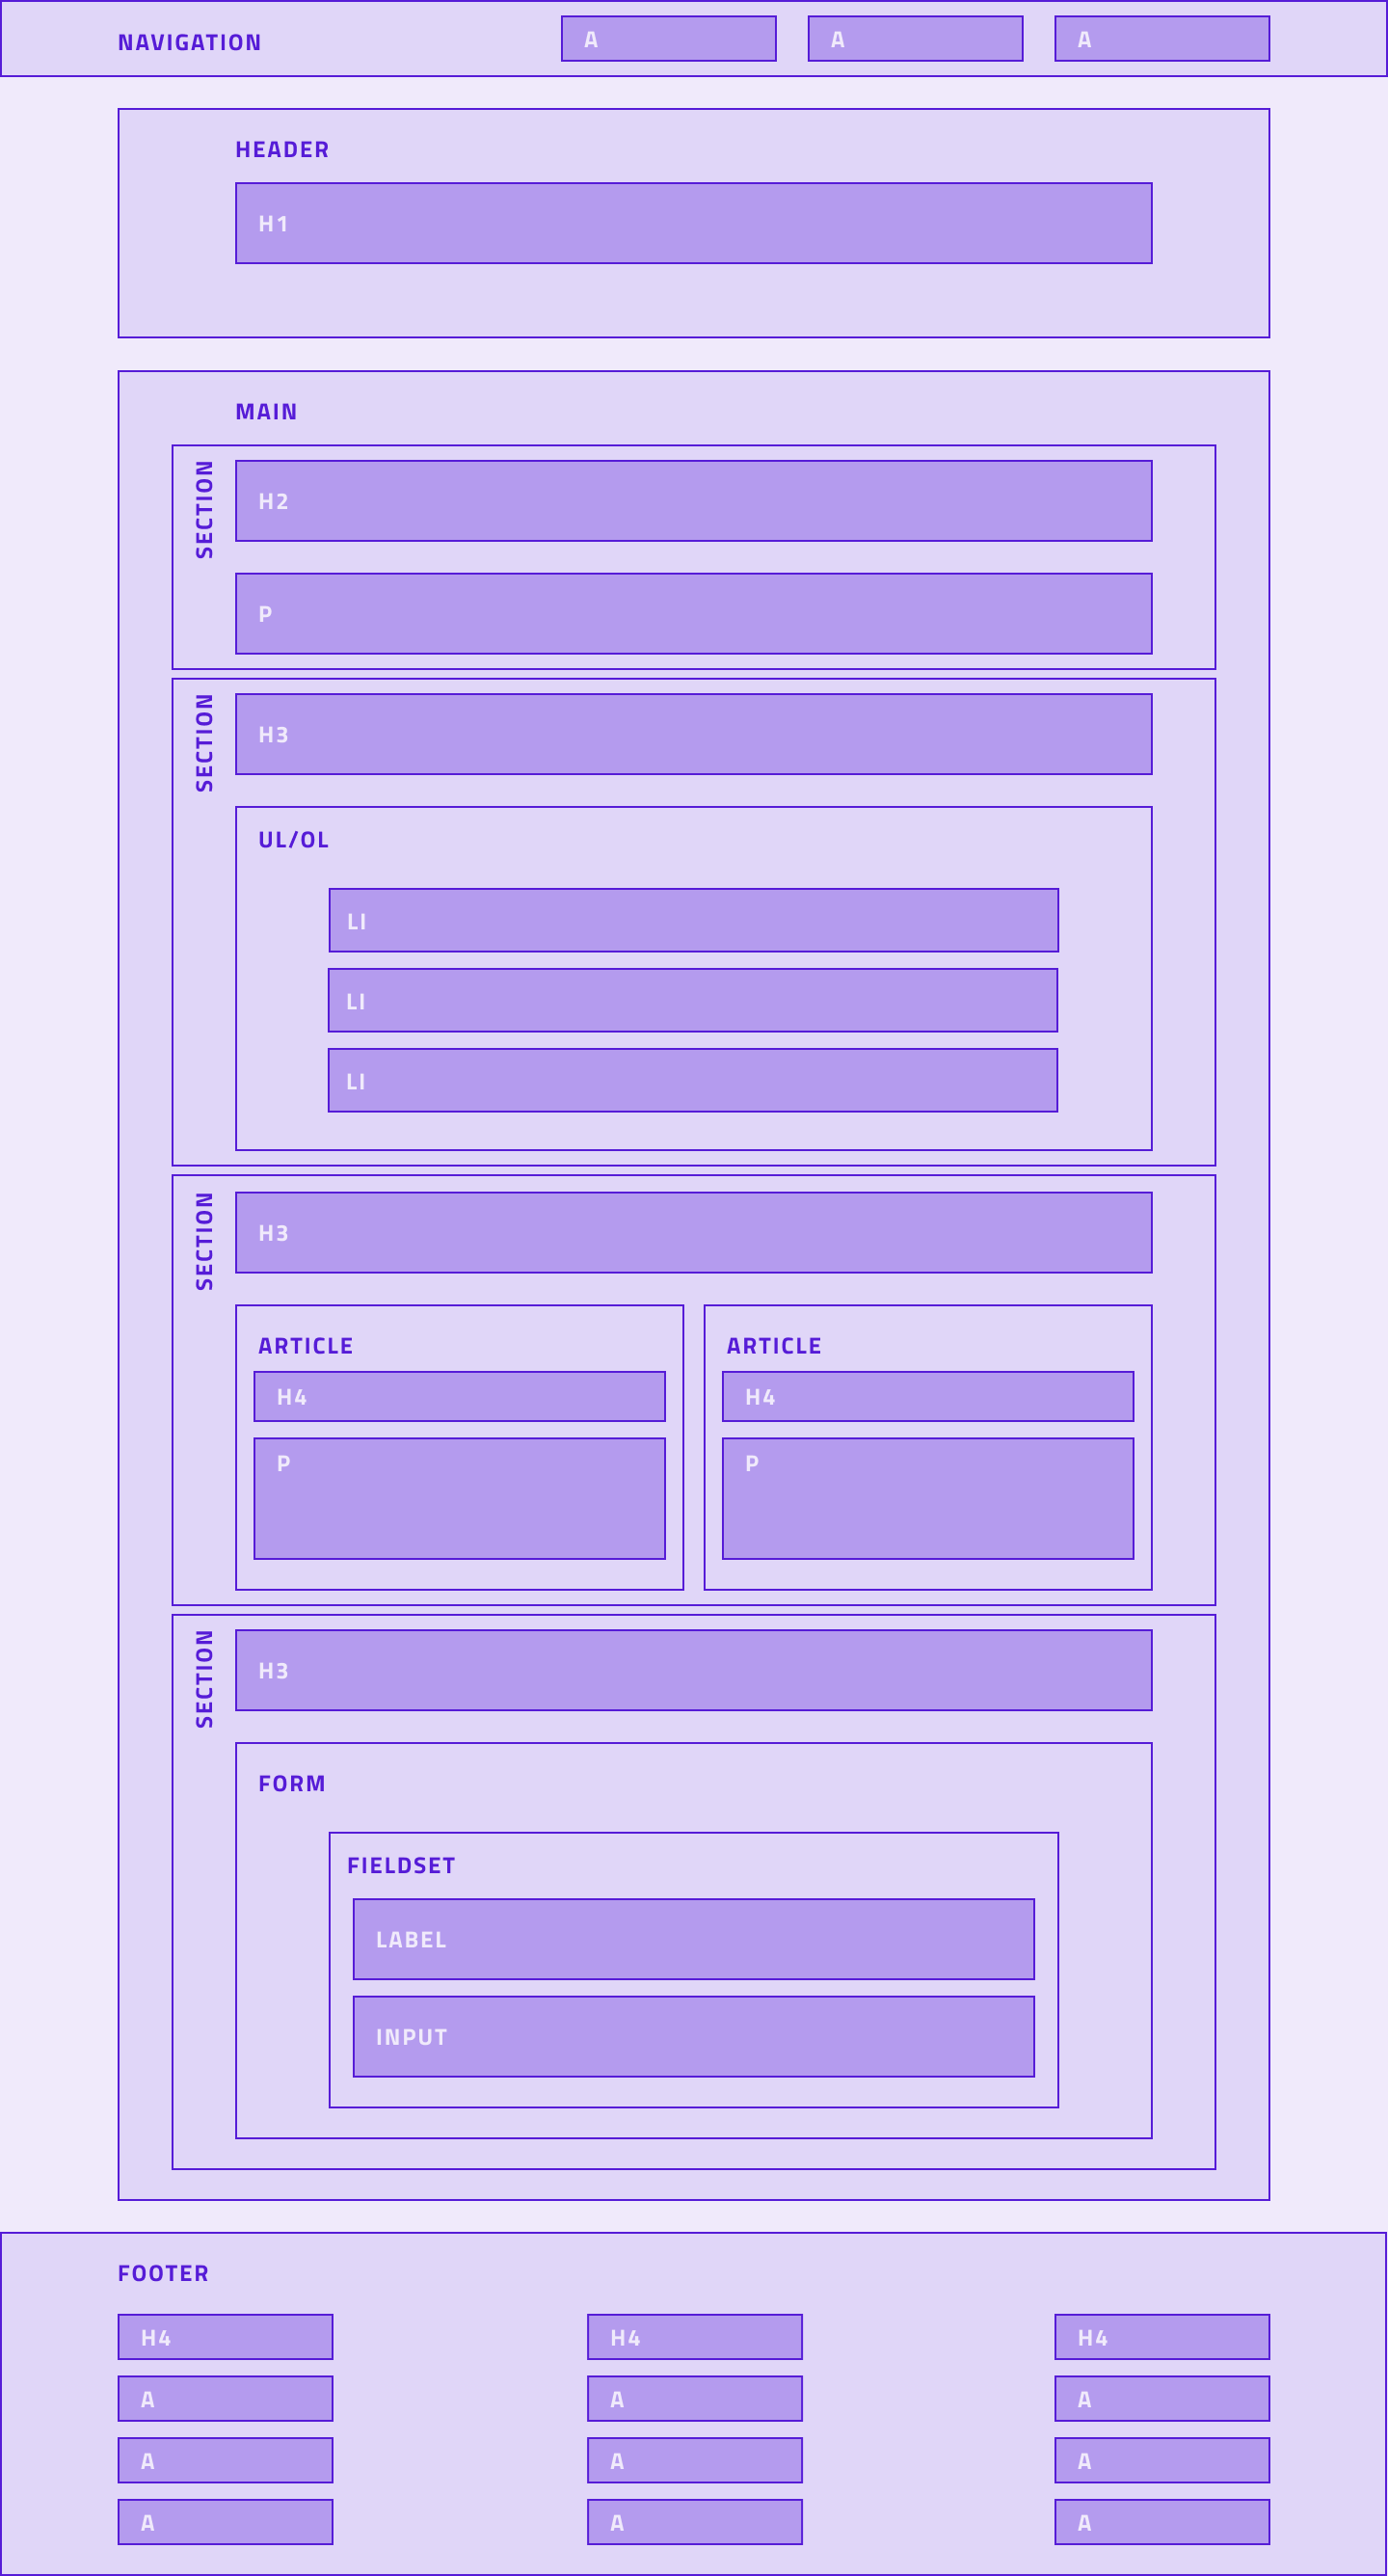 Basic HTML structure as : navigation, header, main, footer with detailed section information as: an heading per section, a fieldset for form, etc.